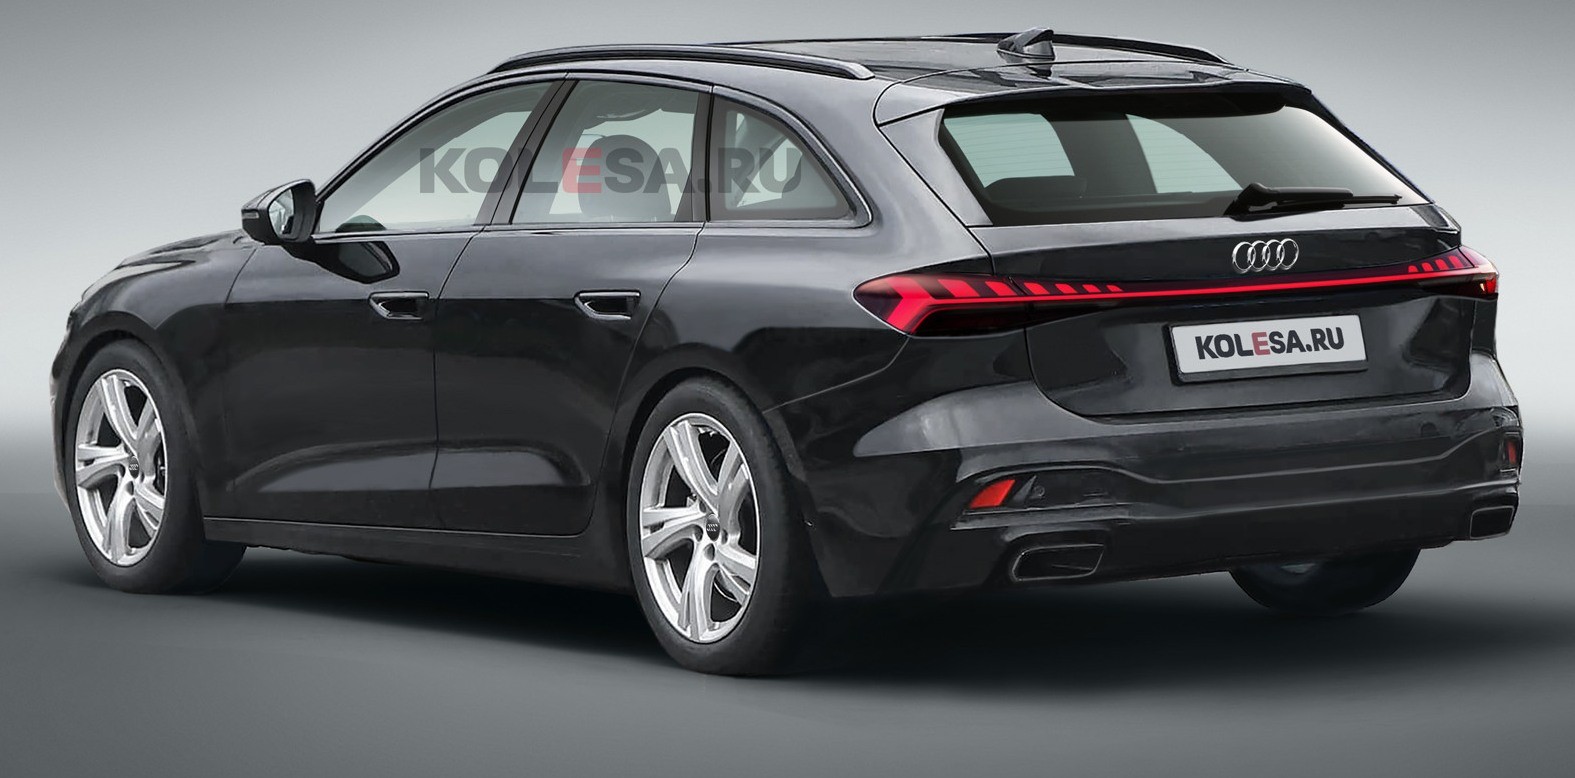 This Is Audi's New A5 Wagon Before You're Supposed To See It